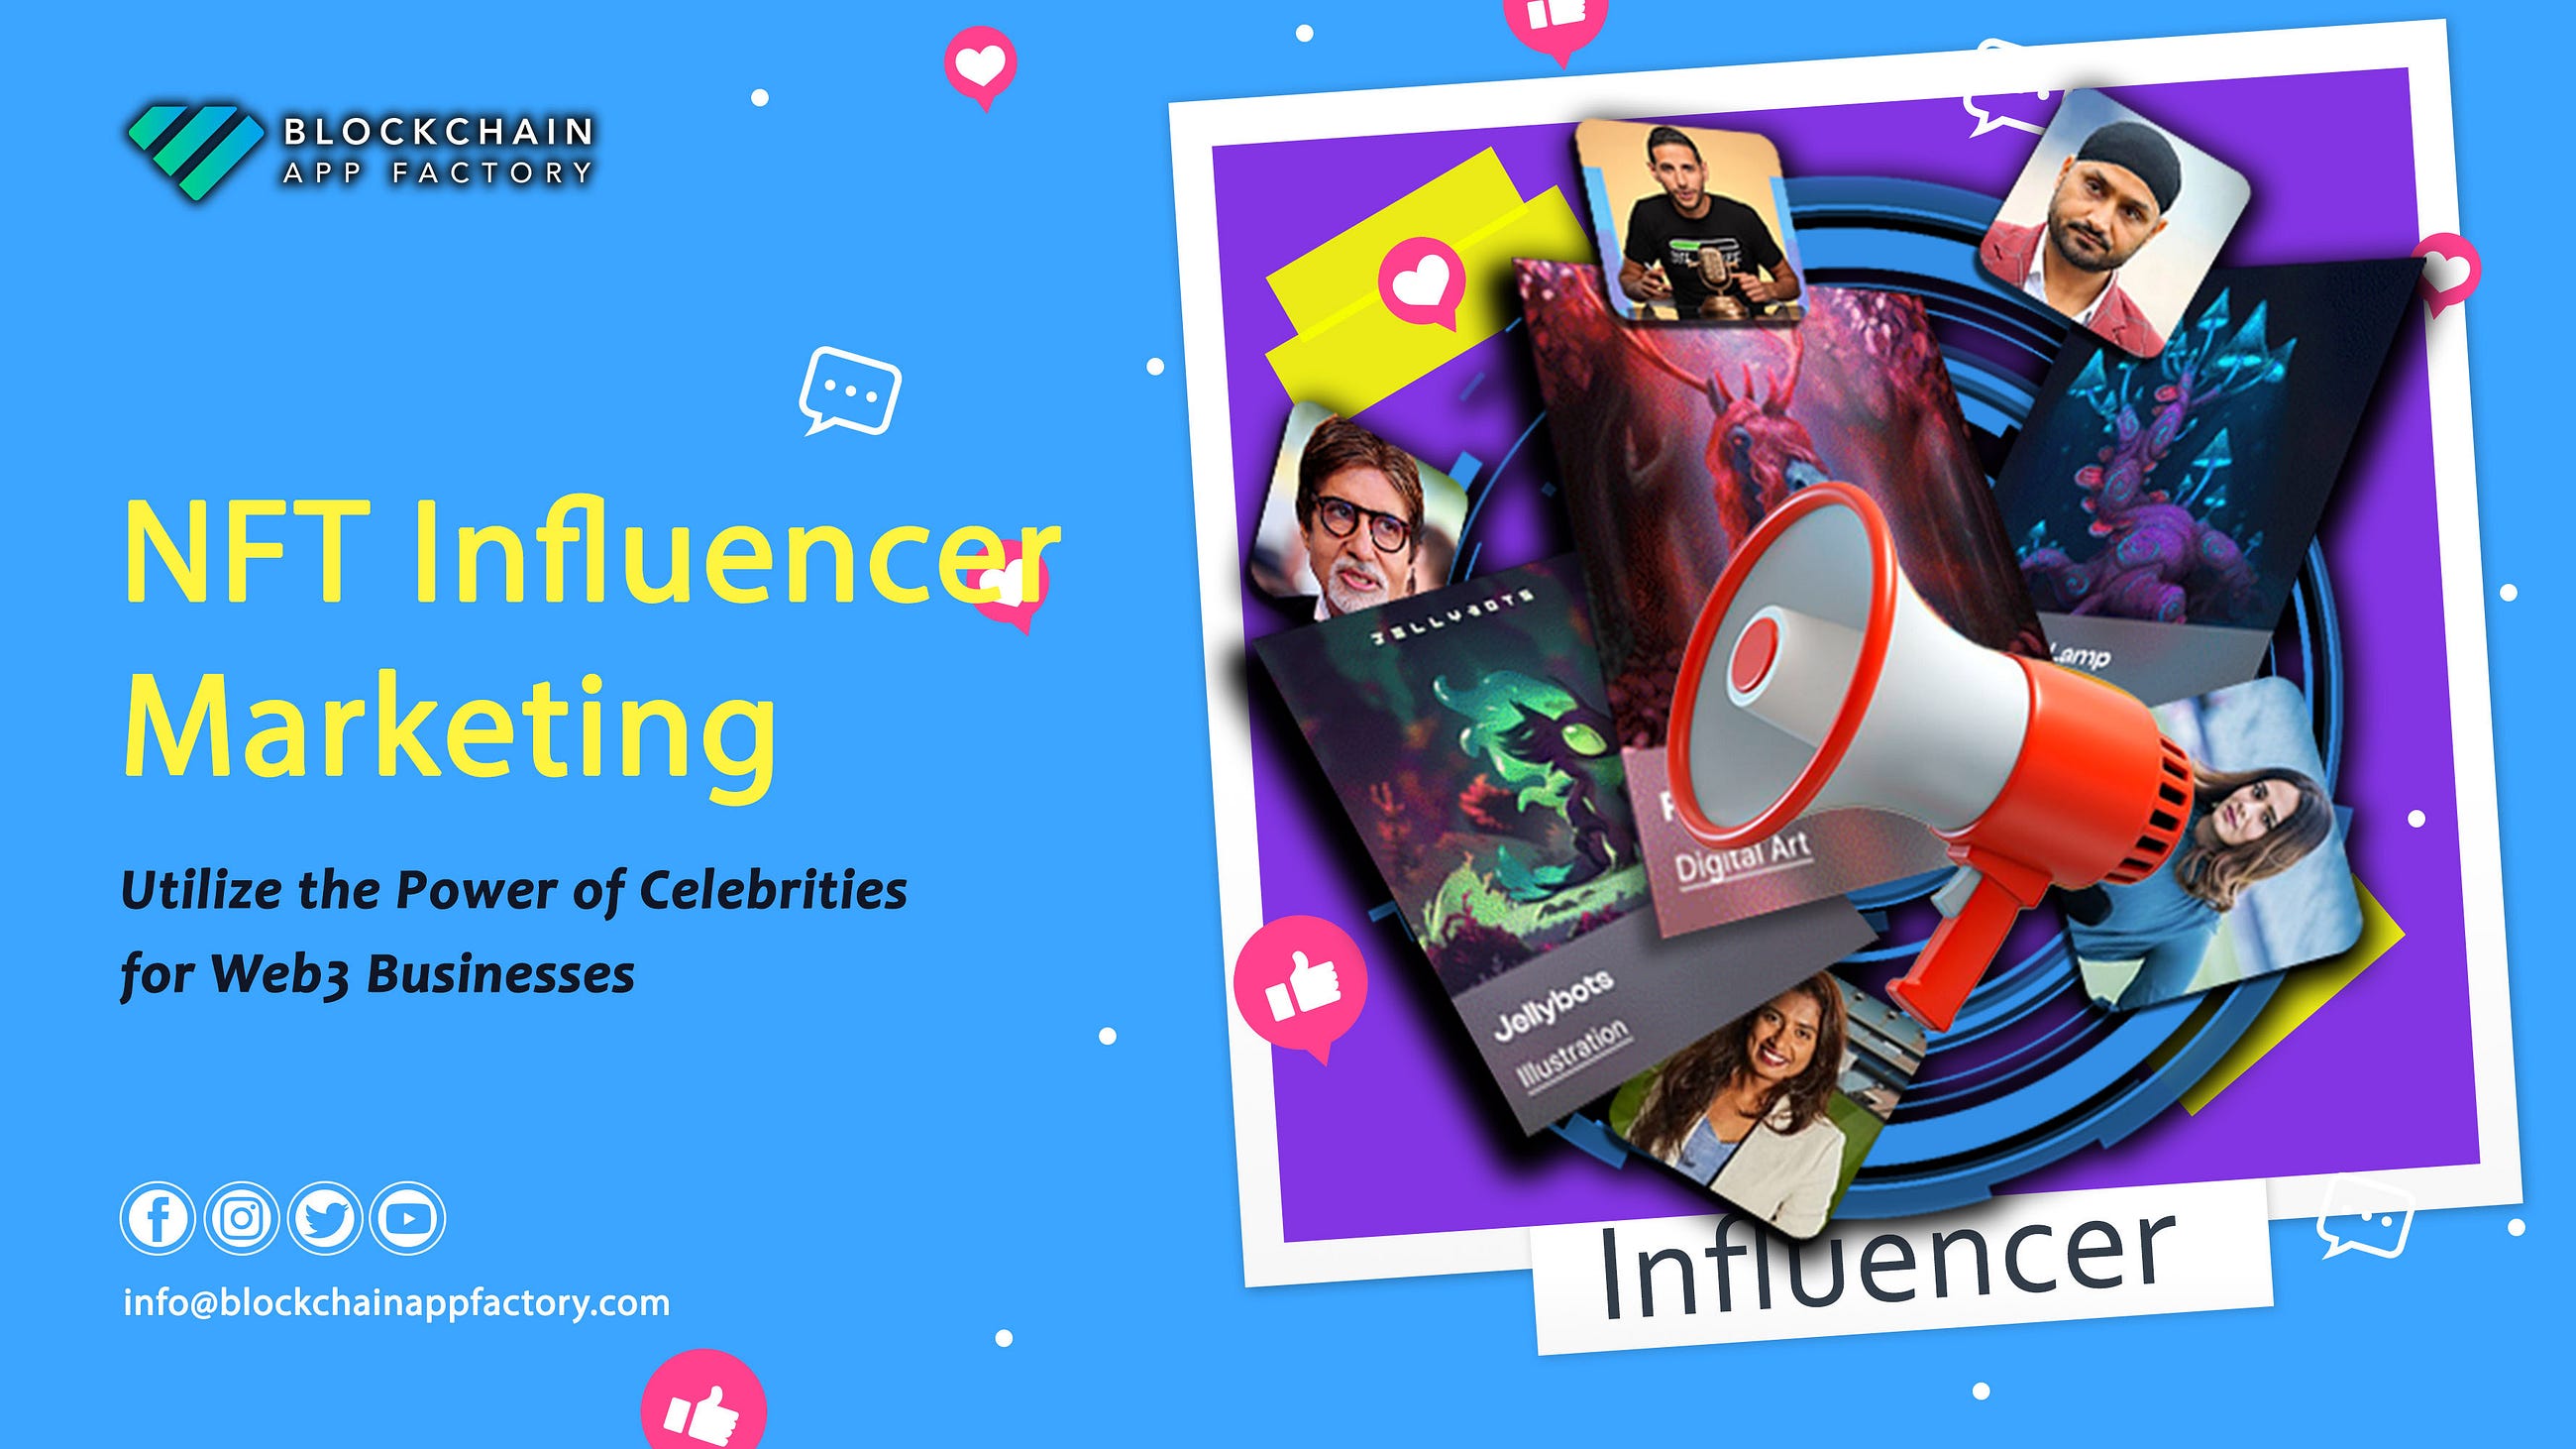 Promote your new Web3 venture worldwide with our strategic NFT influencer marketing services!